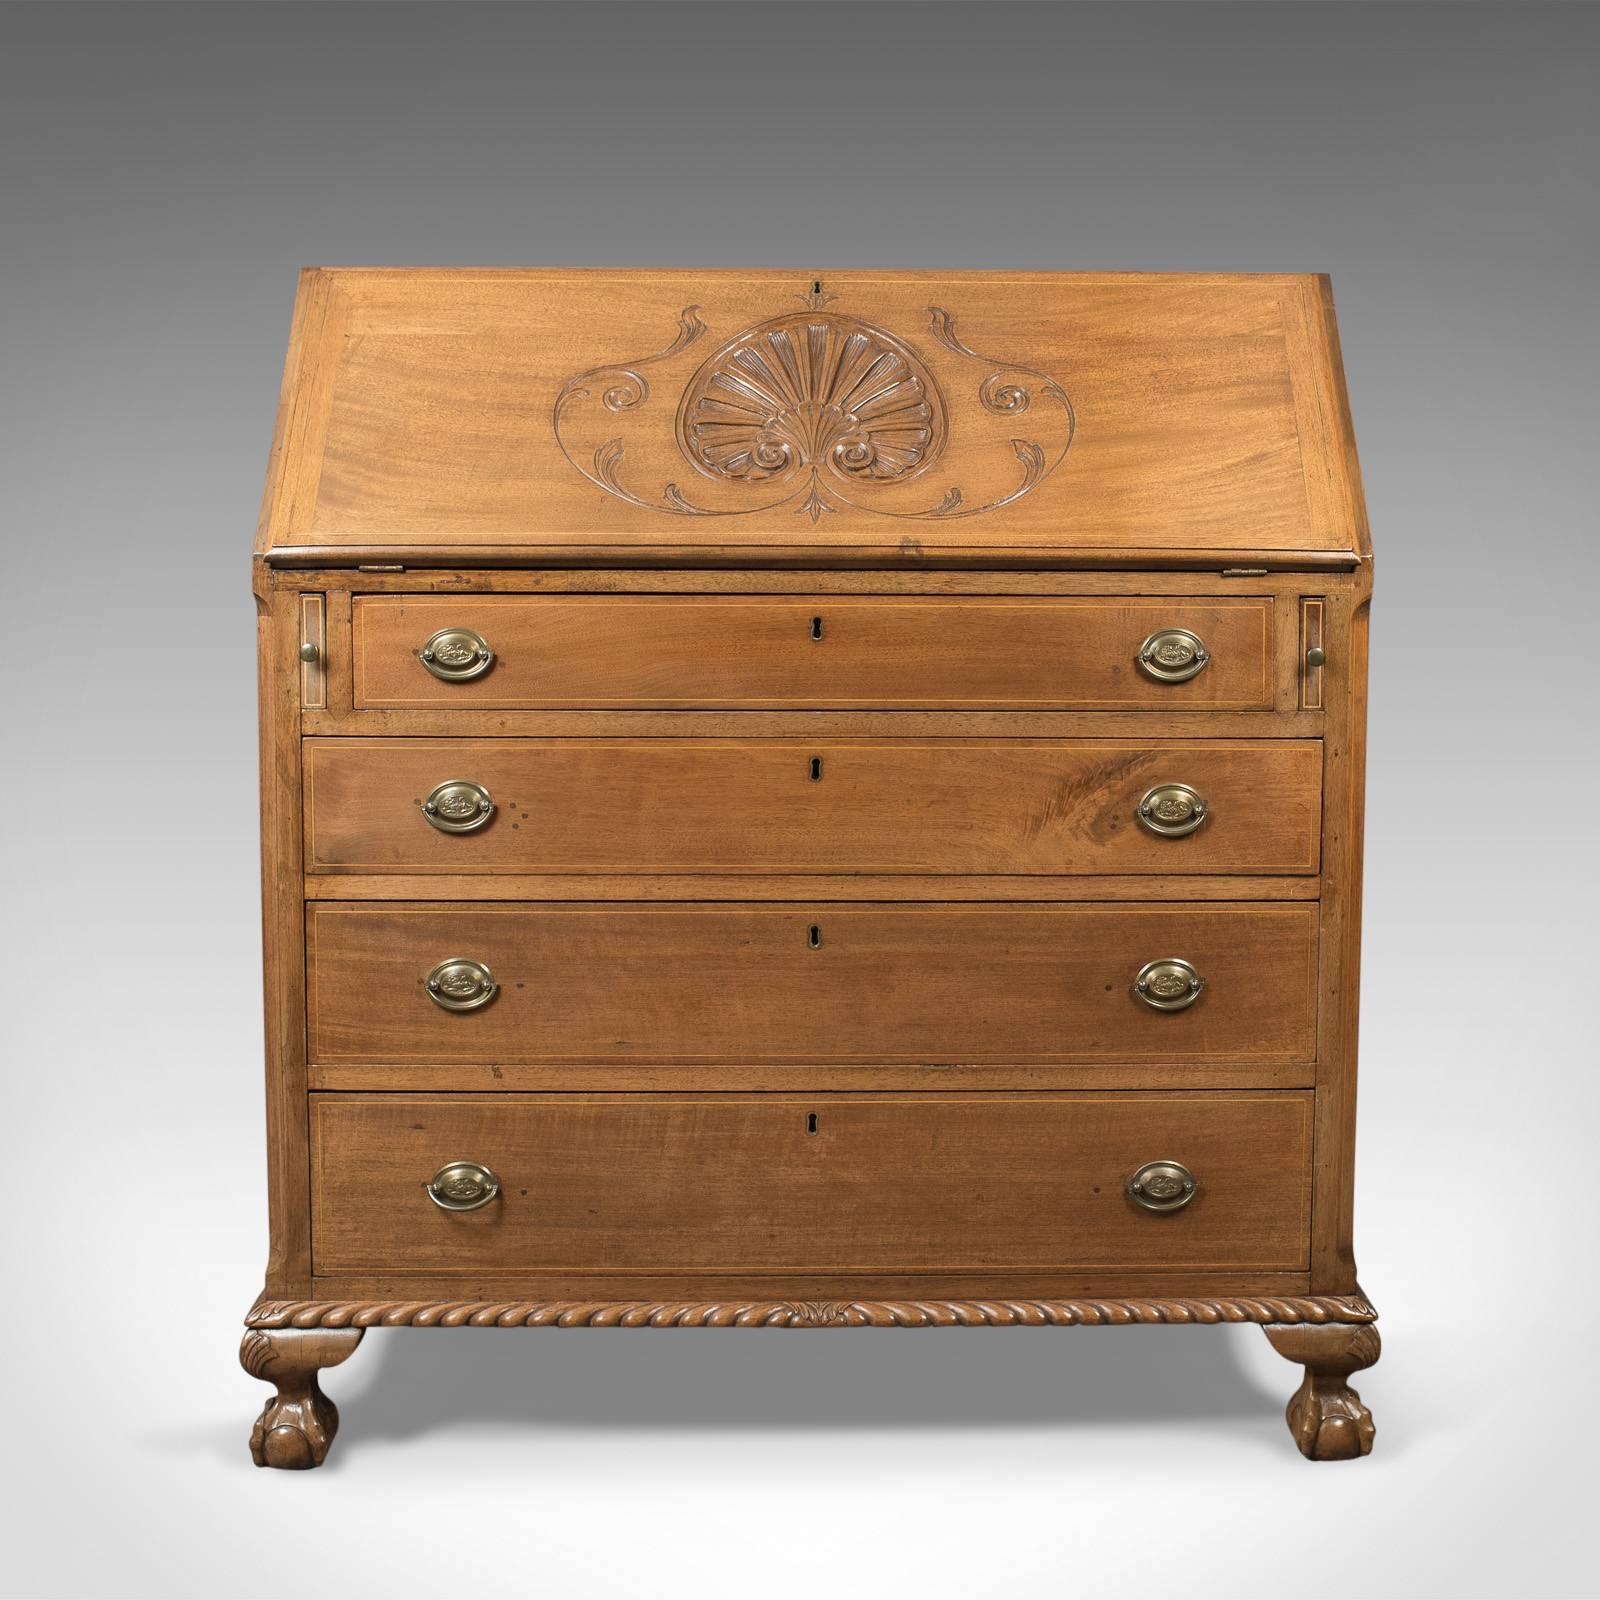 This is a handsome antique bureau, a Victorian walnut desk, English, circa 1900.

Attractive pale walnut displaying exposed dovetails to the top
Raised on squat cabriole legs with carved knees and talon and ball feet
Roped lower moulding, canted